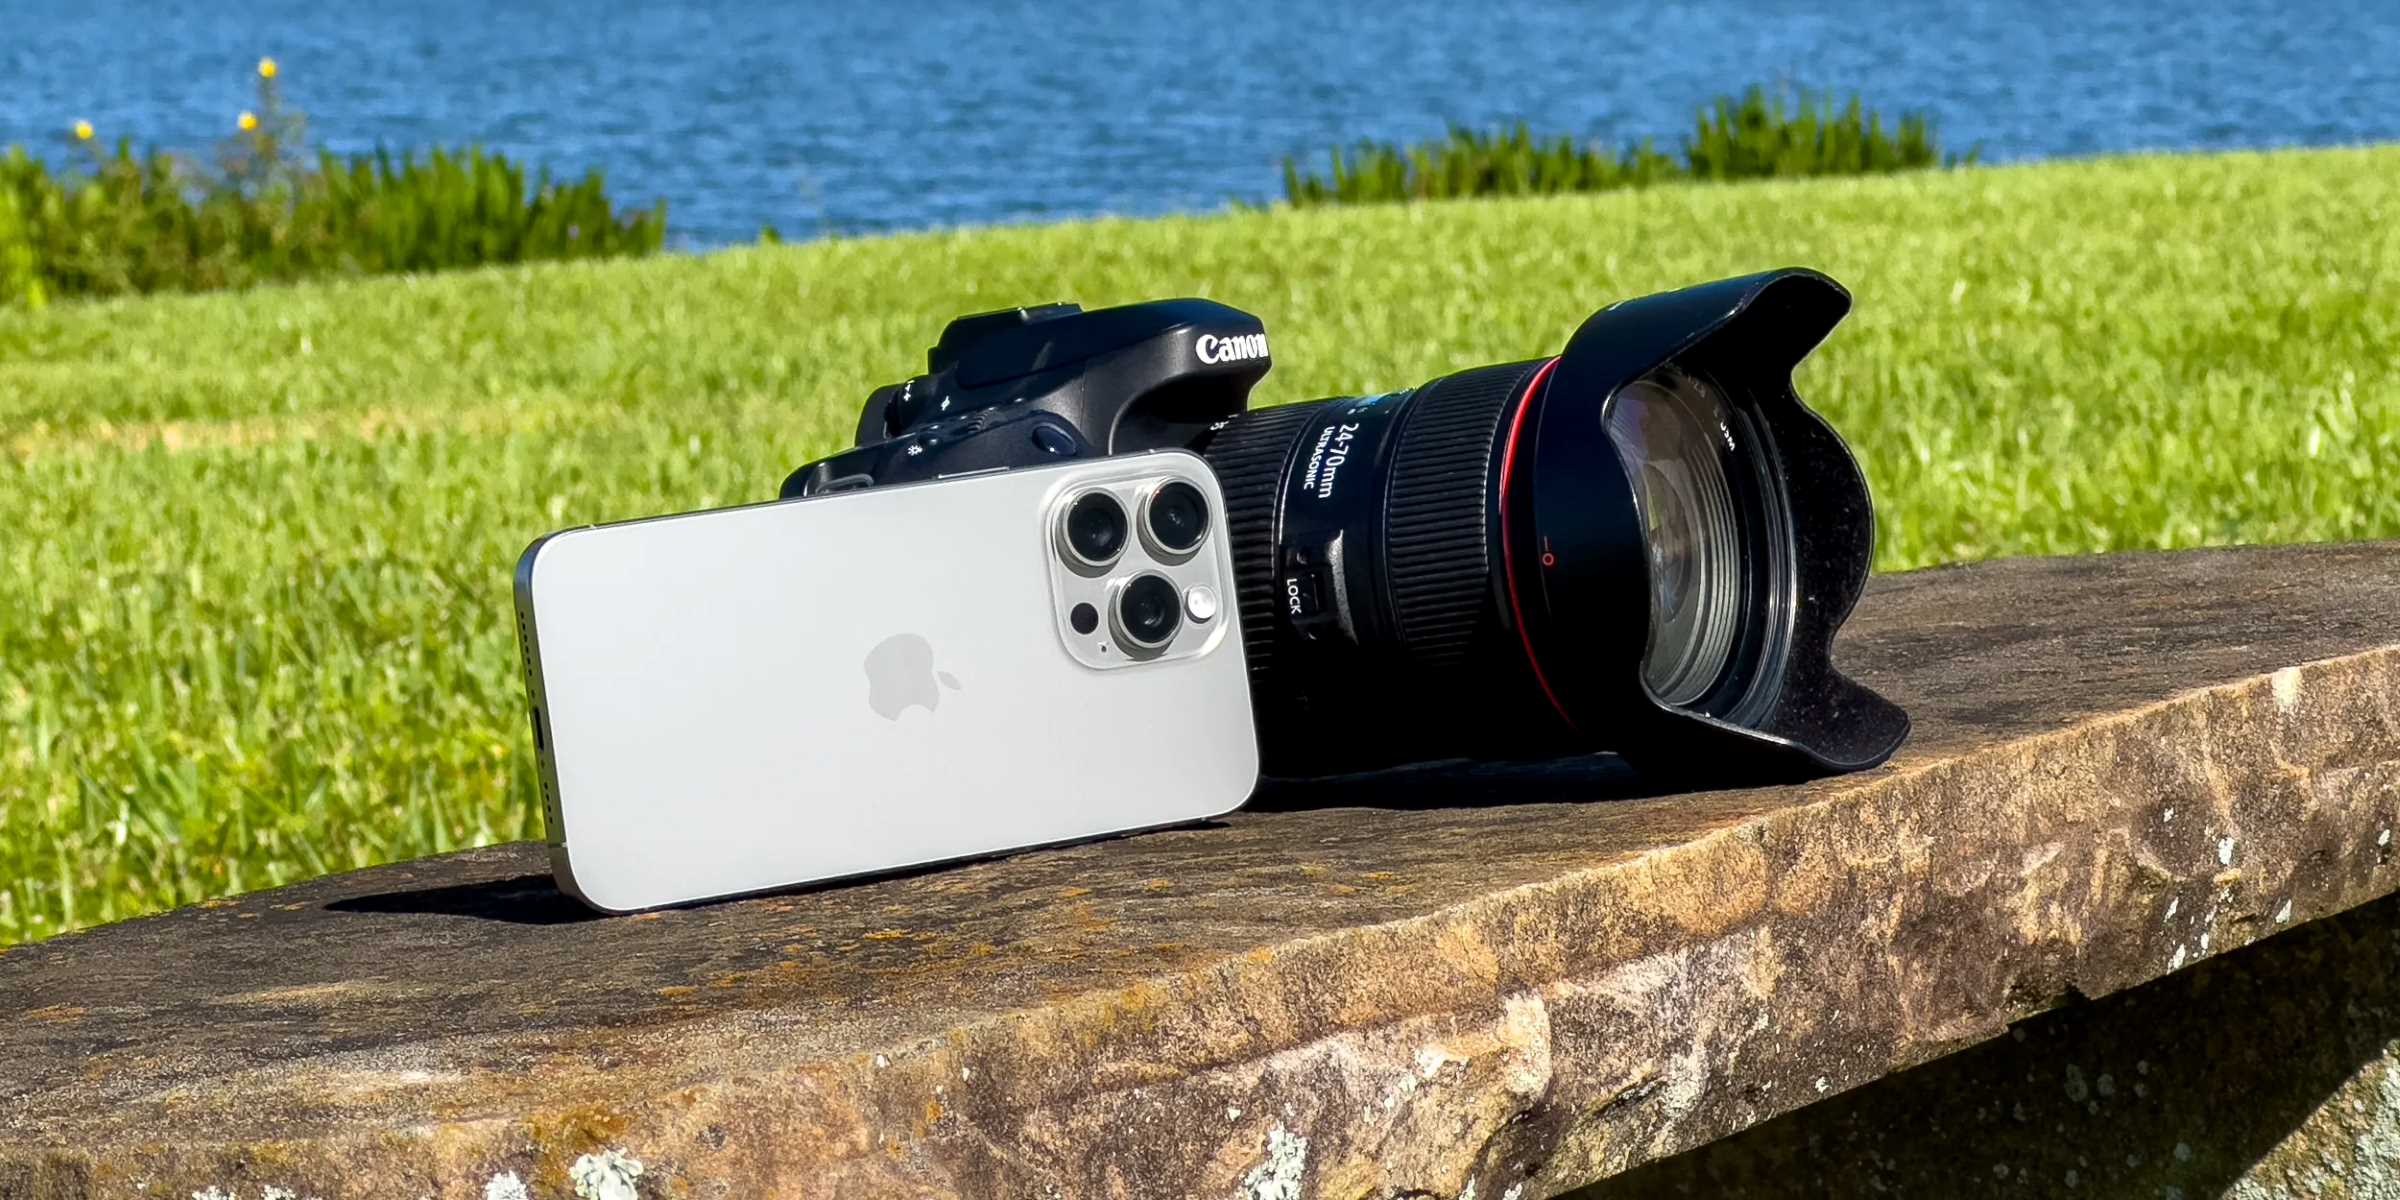 How To Transfer Photos From A DSLR Camera To An IPhone On A Mac